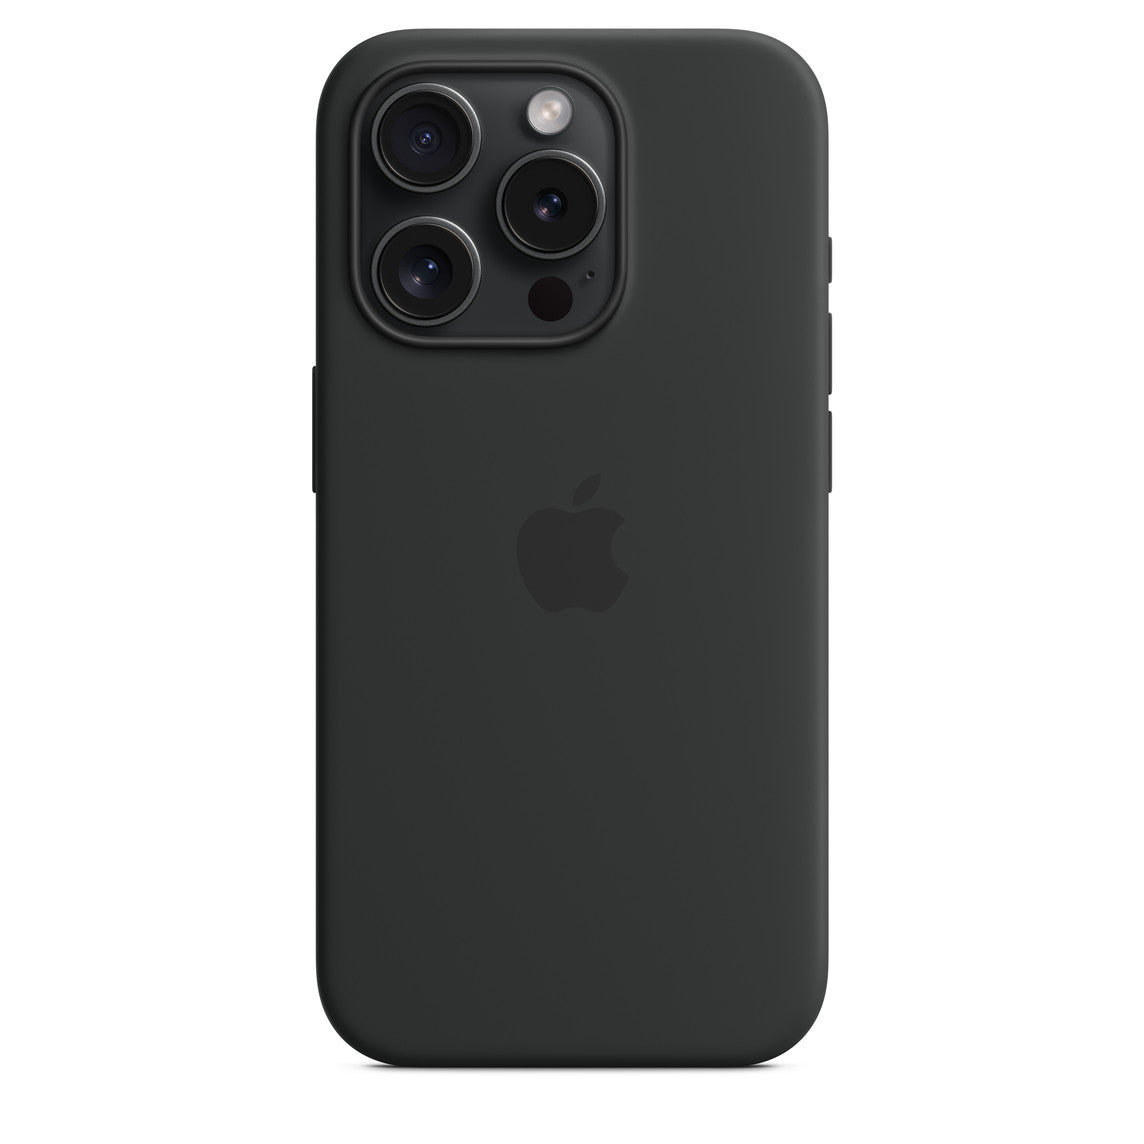 iPhone Pro’s Silicone Case